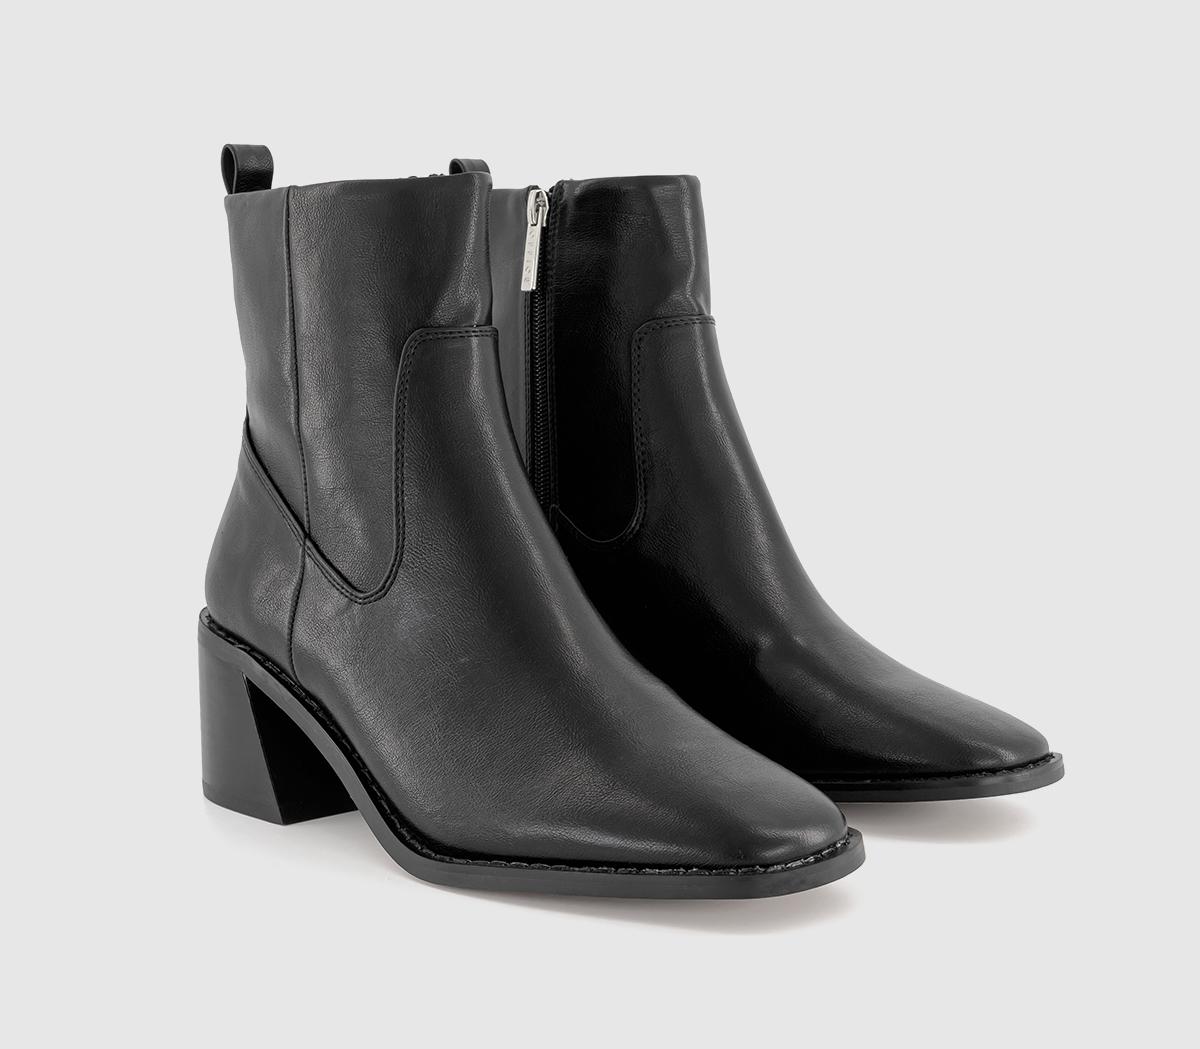 OFFICE Aspire Low Block Heel Ankle Boots Black - Women's Ankle Boots